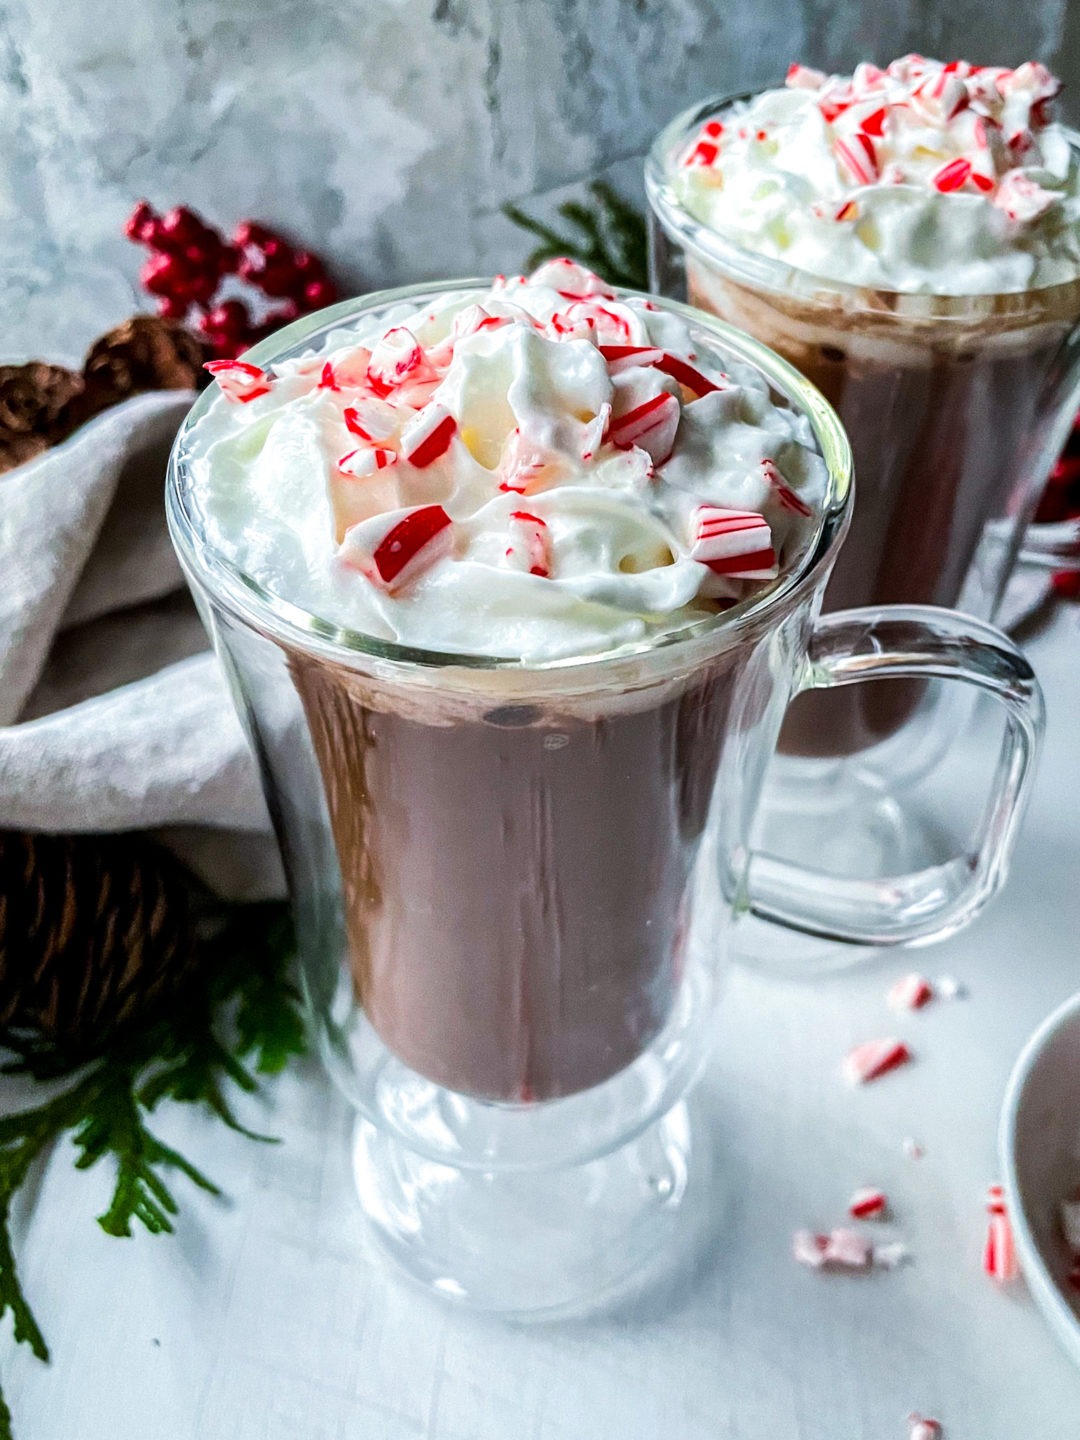 Creamy vegan hot chocolate with coconut whipped cream and crushed candy canes.